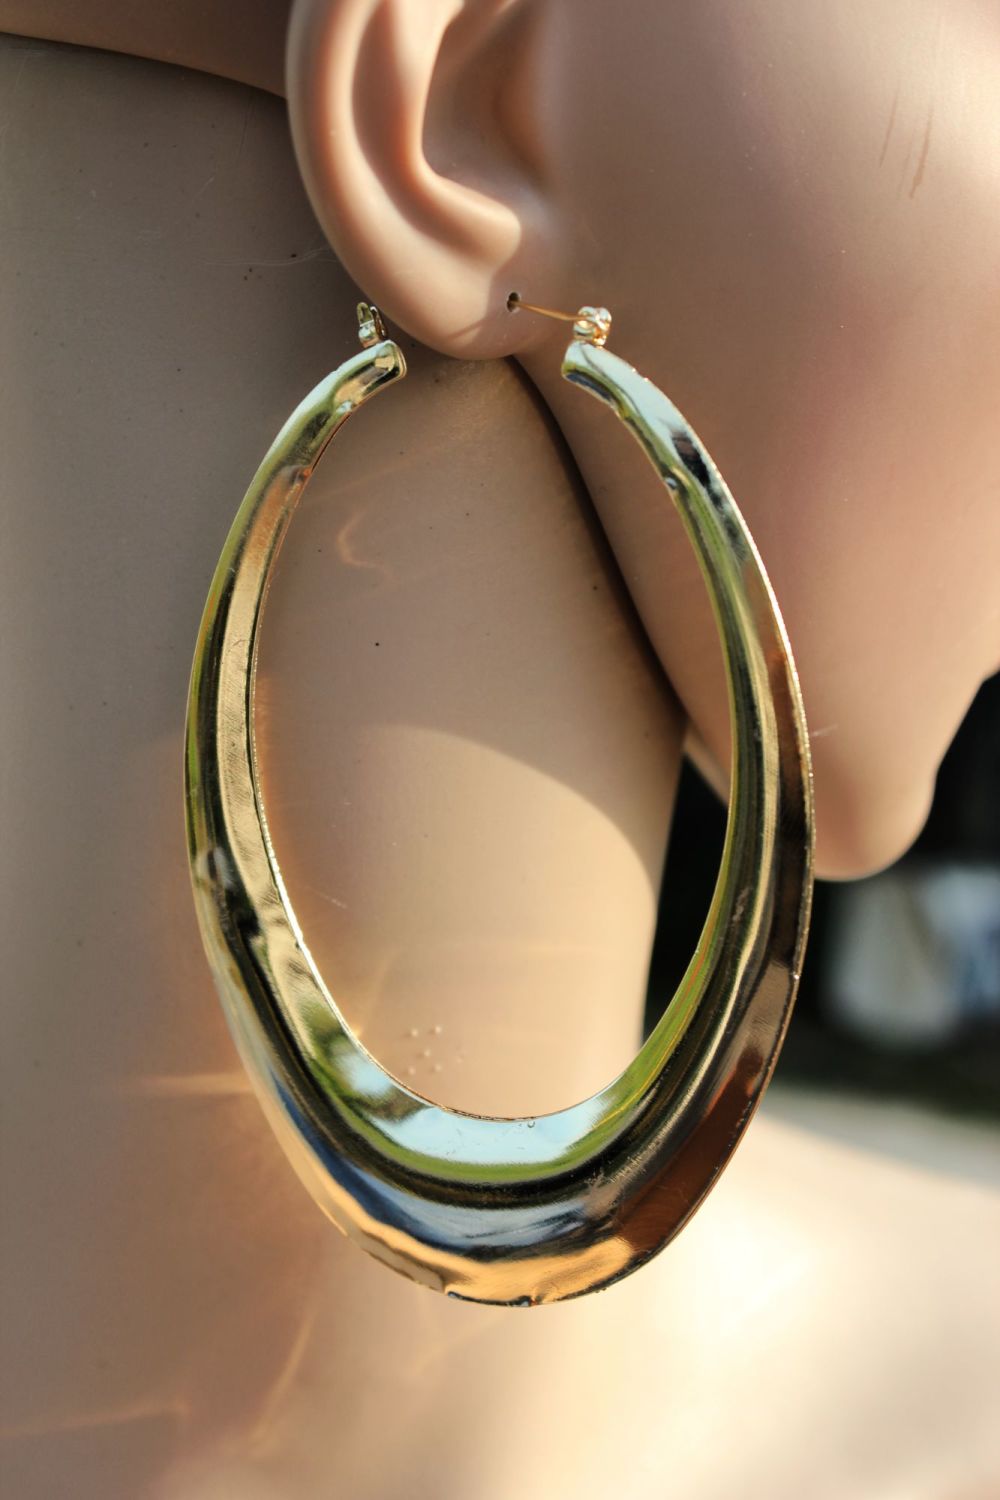 Tear Drops Over Size Fashion Hoops